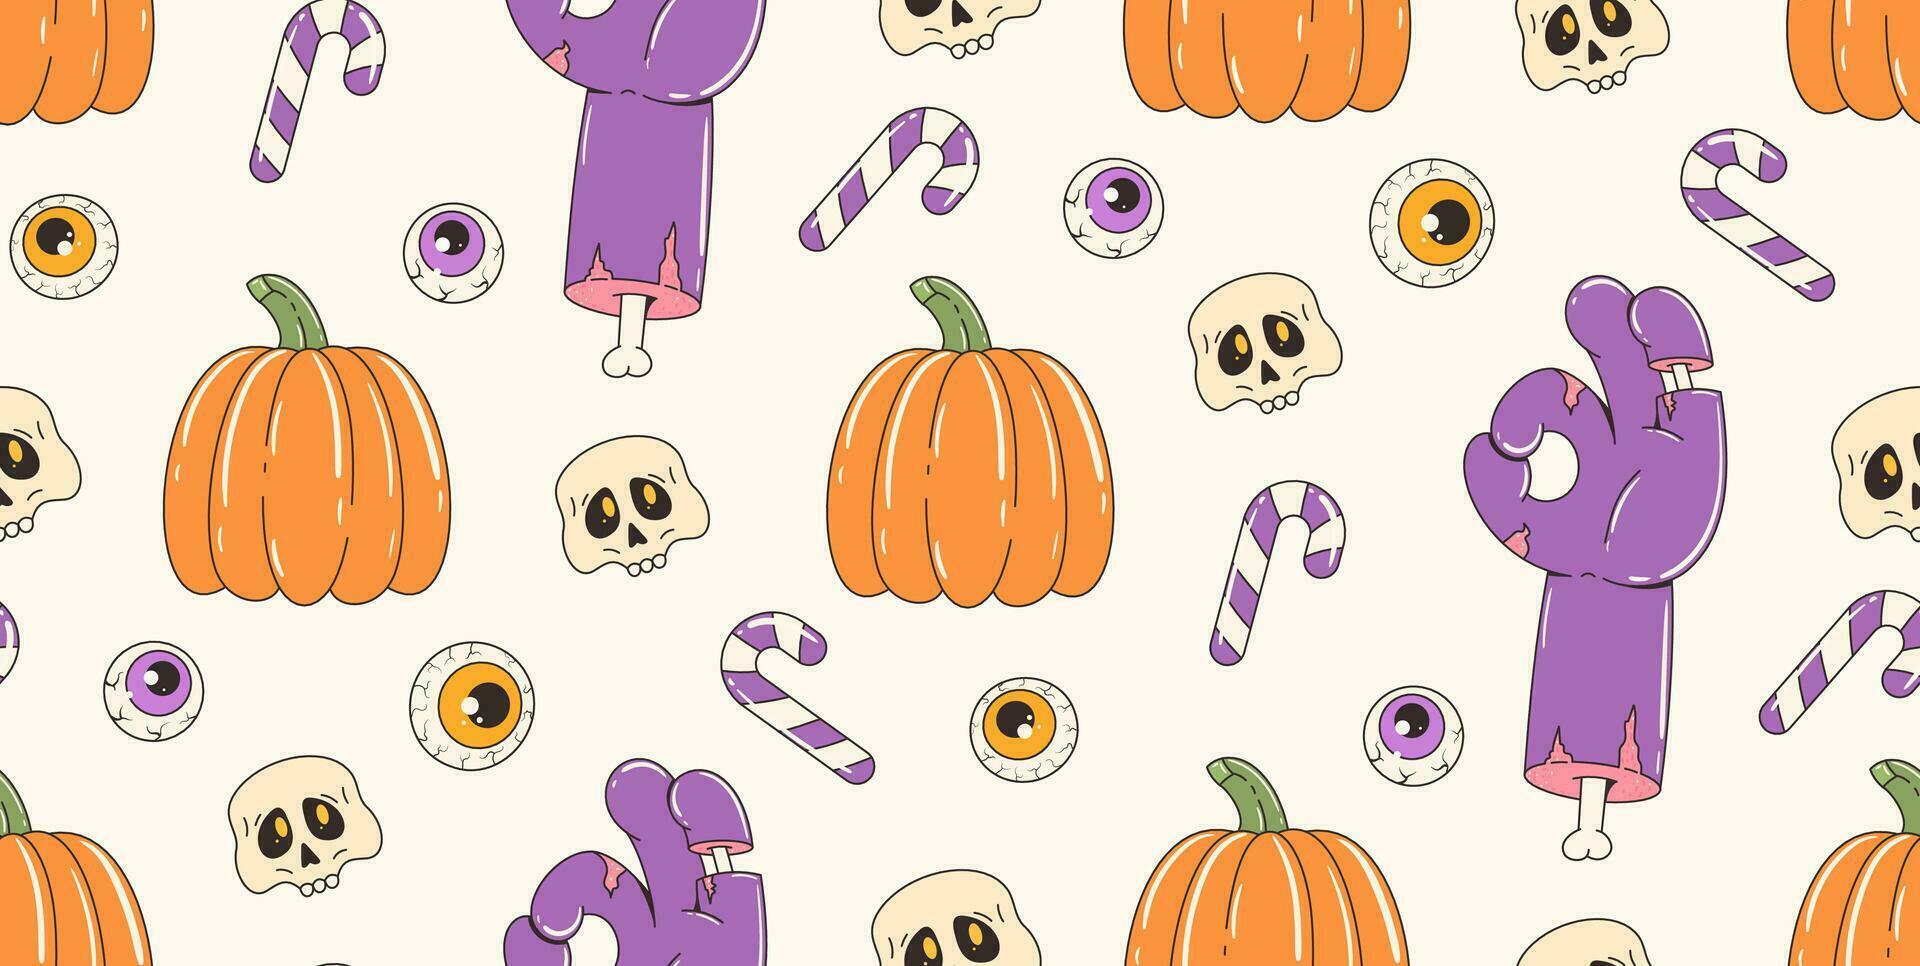 Colorful seamless pattern on halloween theme. Retro cartoon elements and characters. Zombie hand, pumpkin, candy, skull. Contemporary vector background.